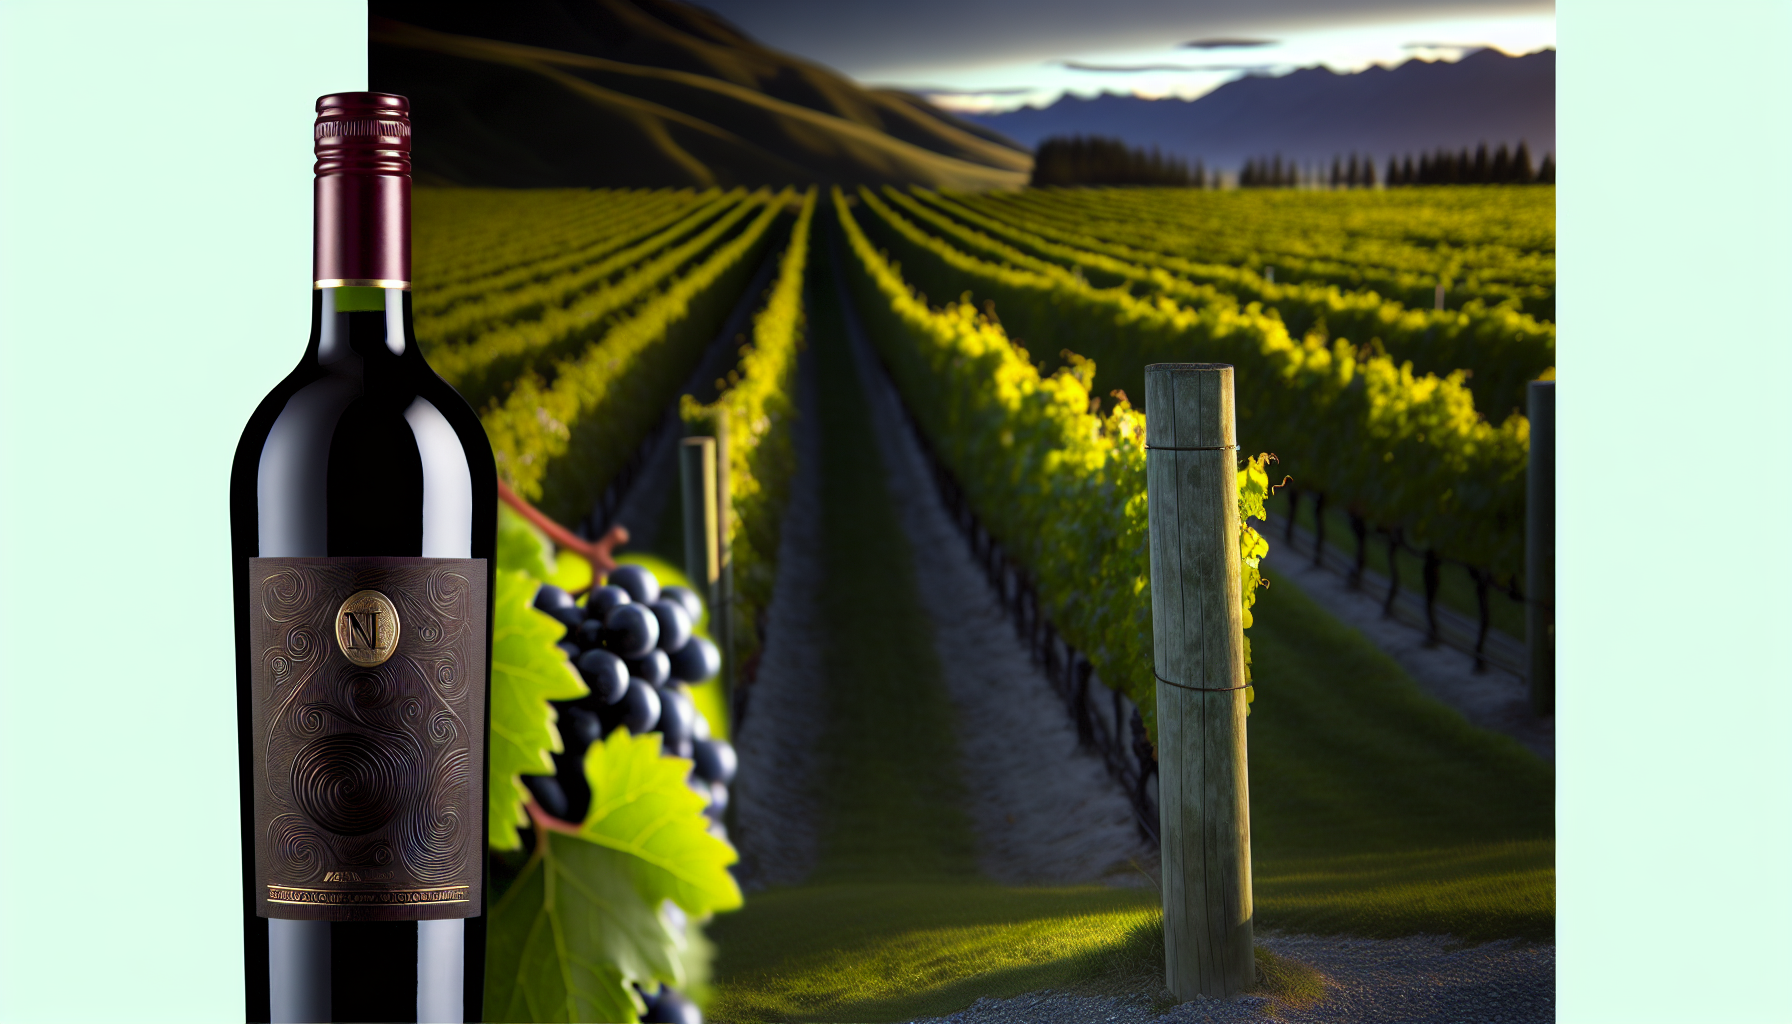 Elegant bottle of NZ Cabernet Sauvignon with vineyard in the background